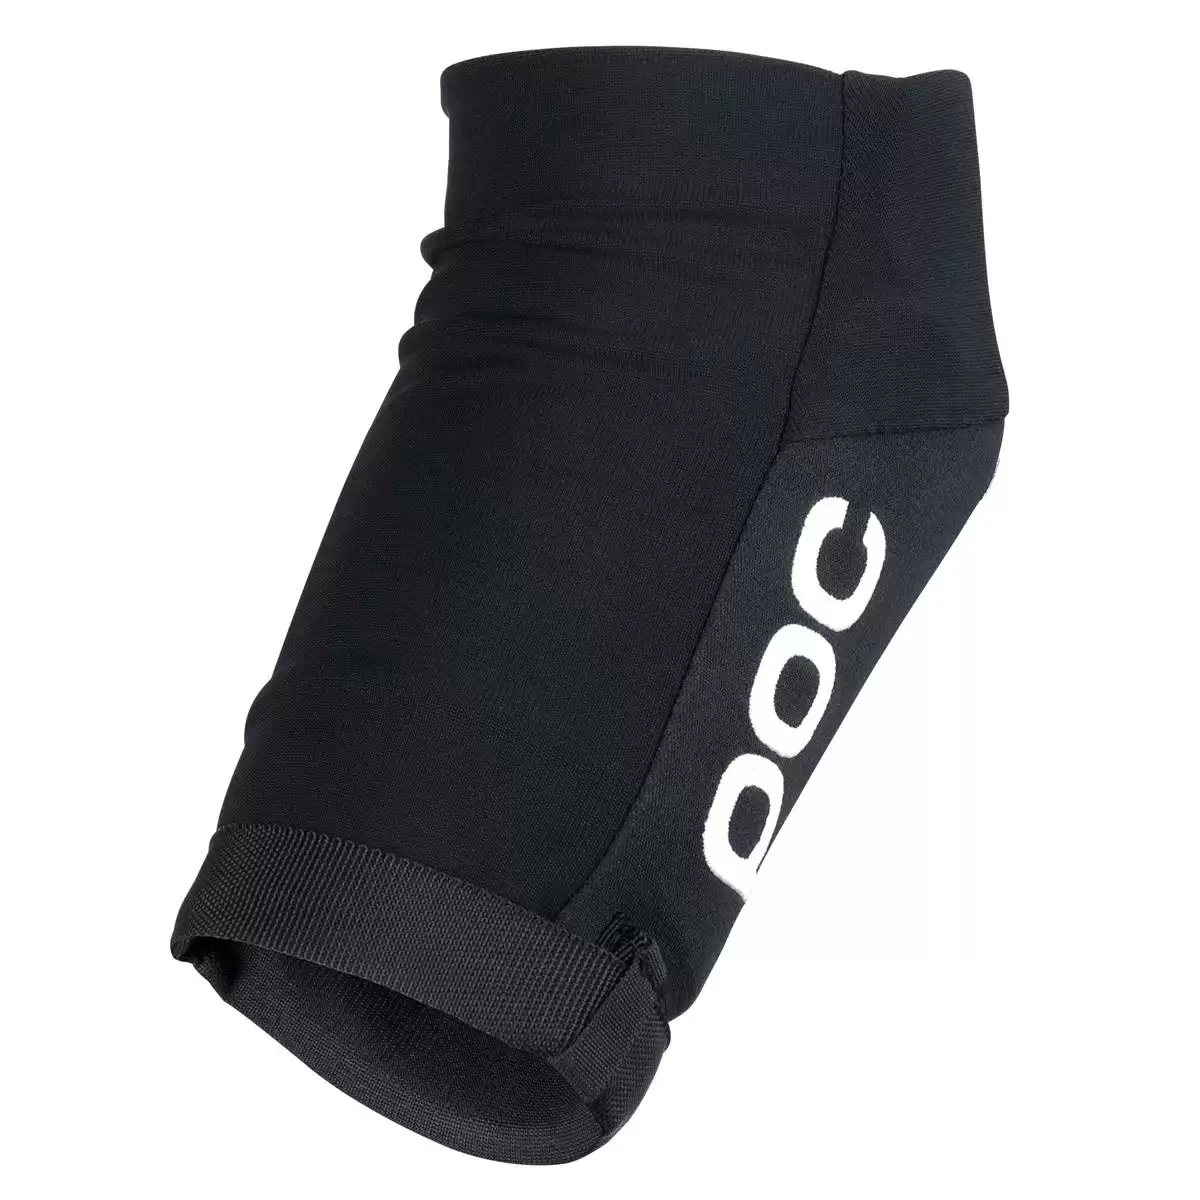 Joint VPD Air Elbow pads black size XS #3